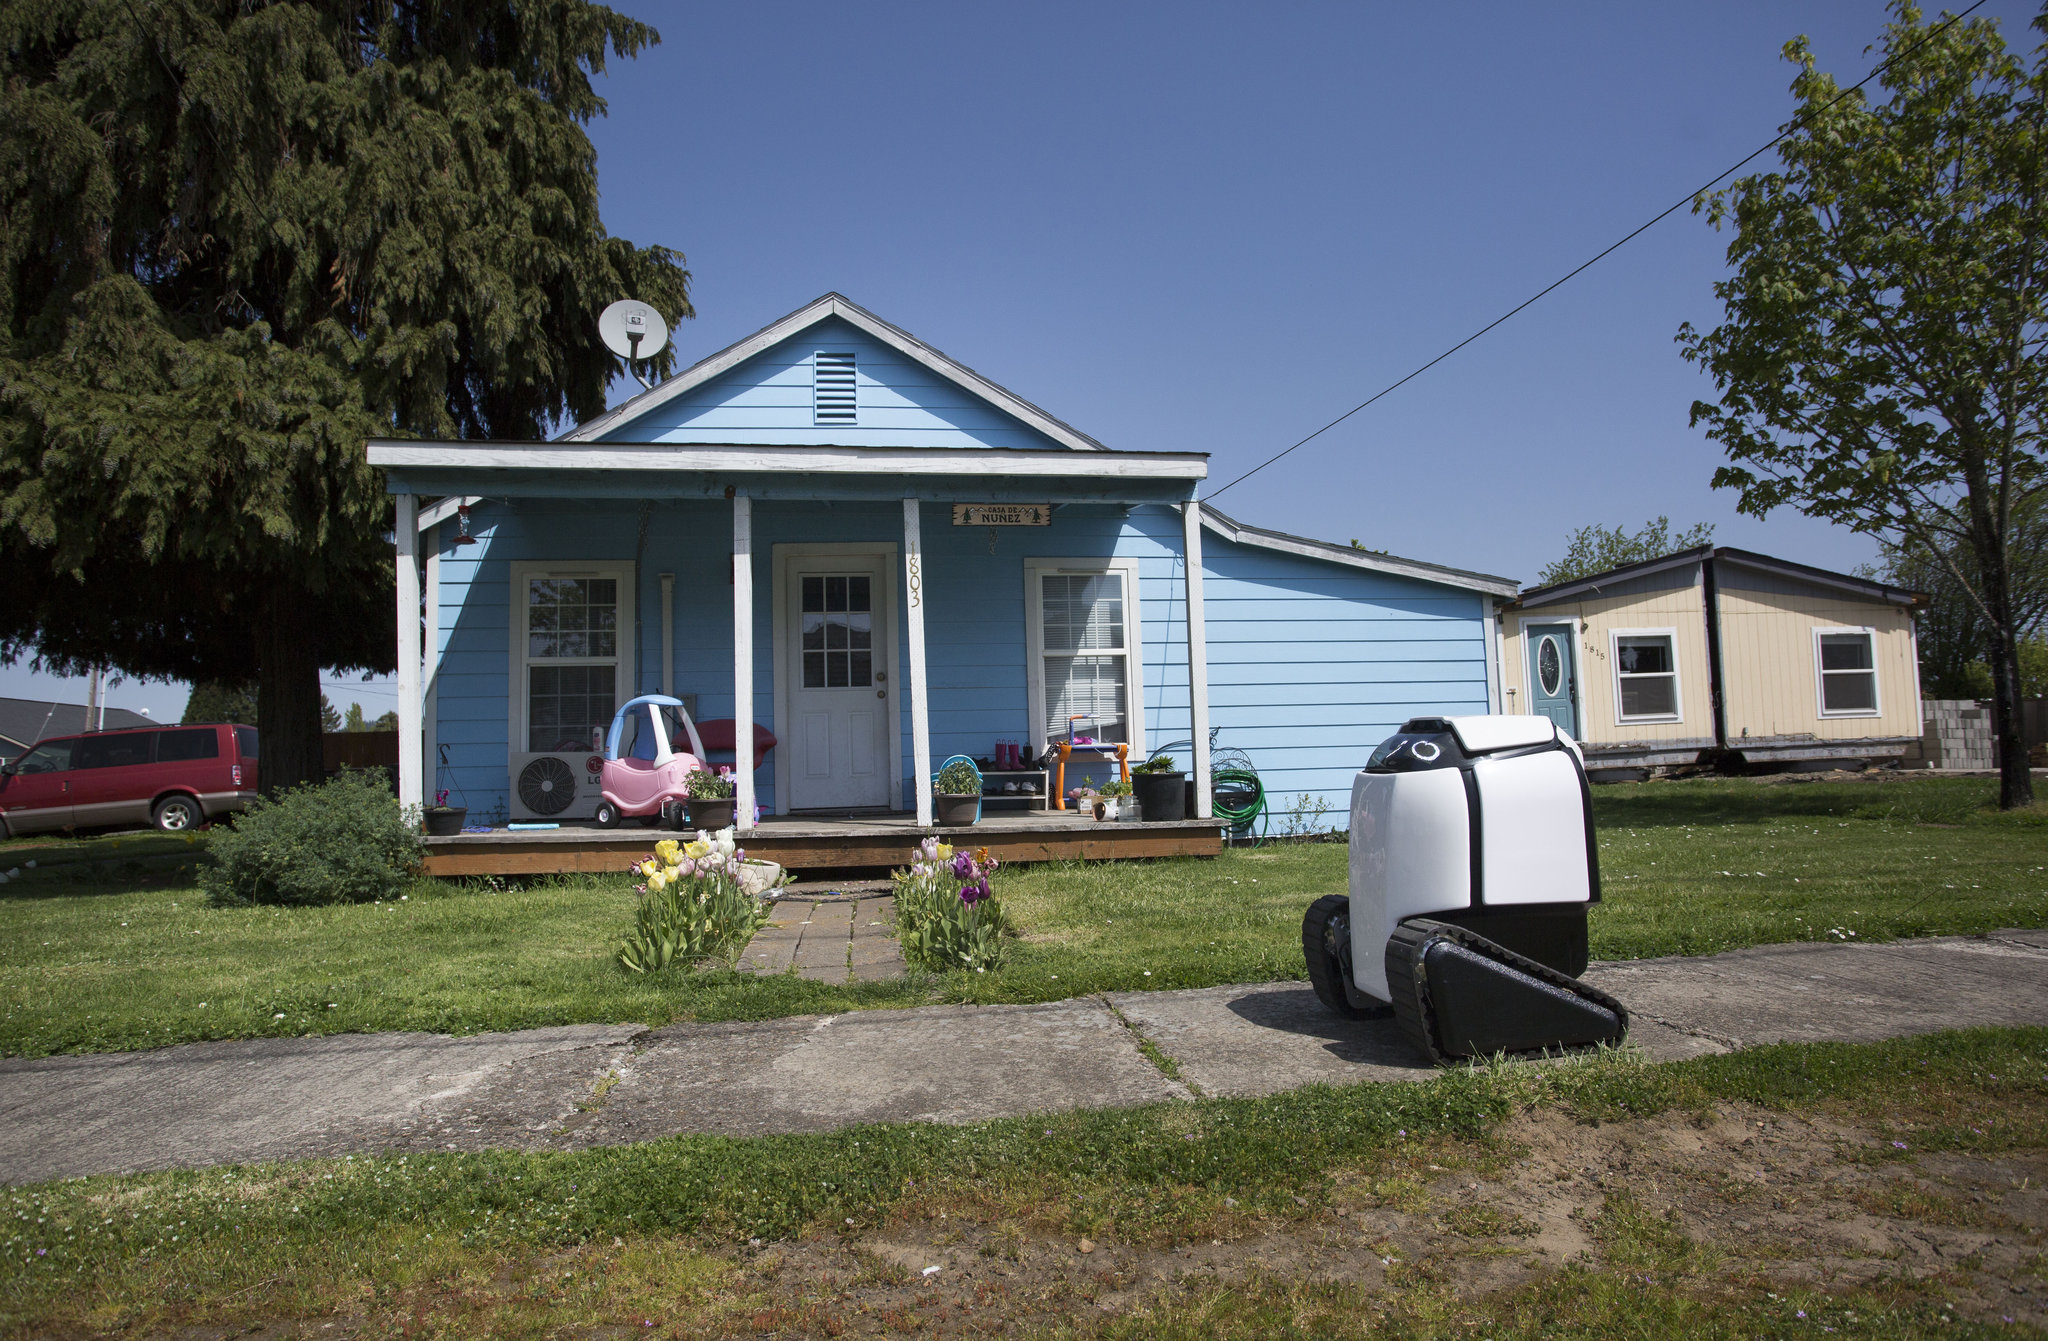 A delivery robot rolled through a neighborhood in Philomath, Ore., in April. The robot’s inventor is a native of the town and hopes that with more people shopping online, such robots will take off, reducing traffic and pollution.